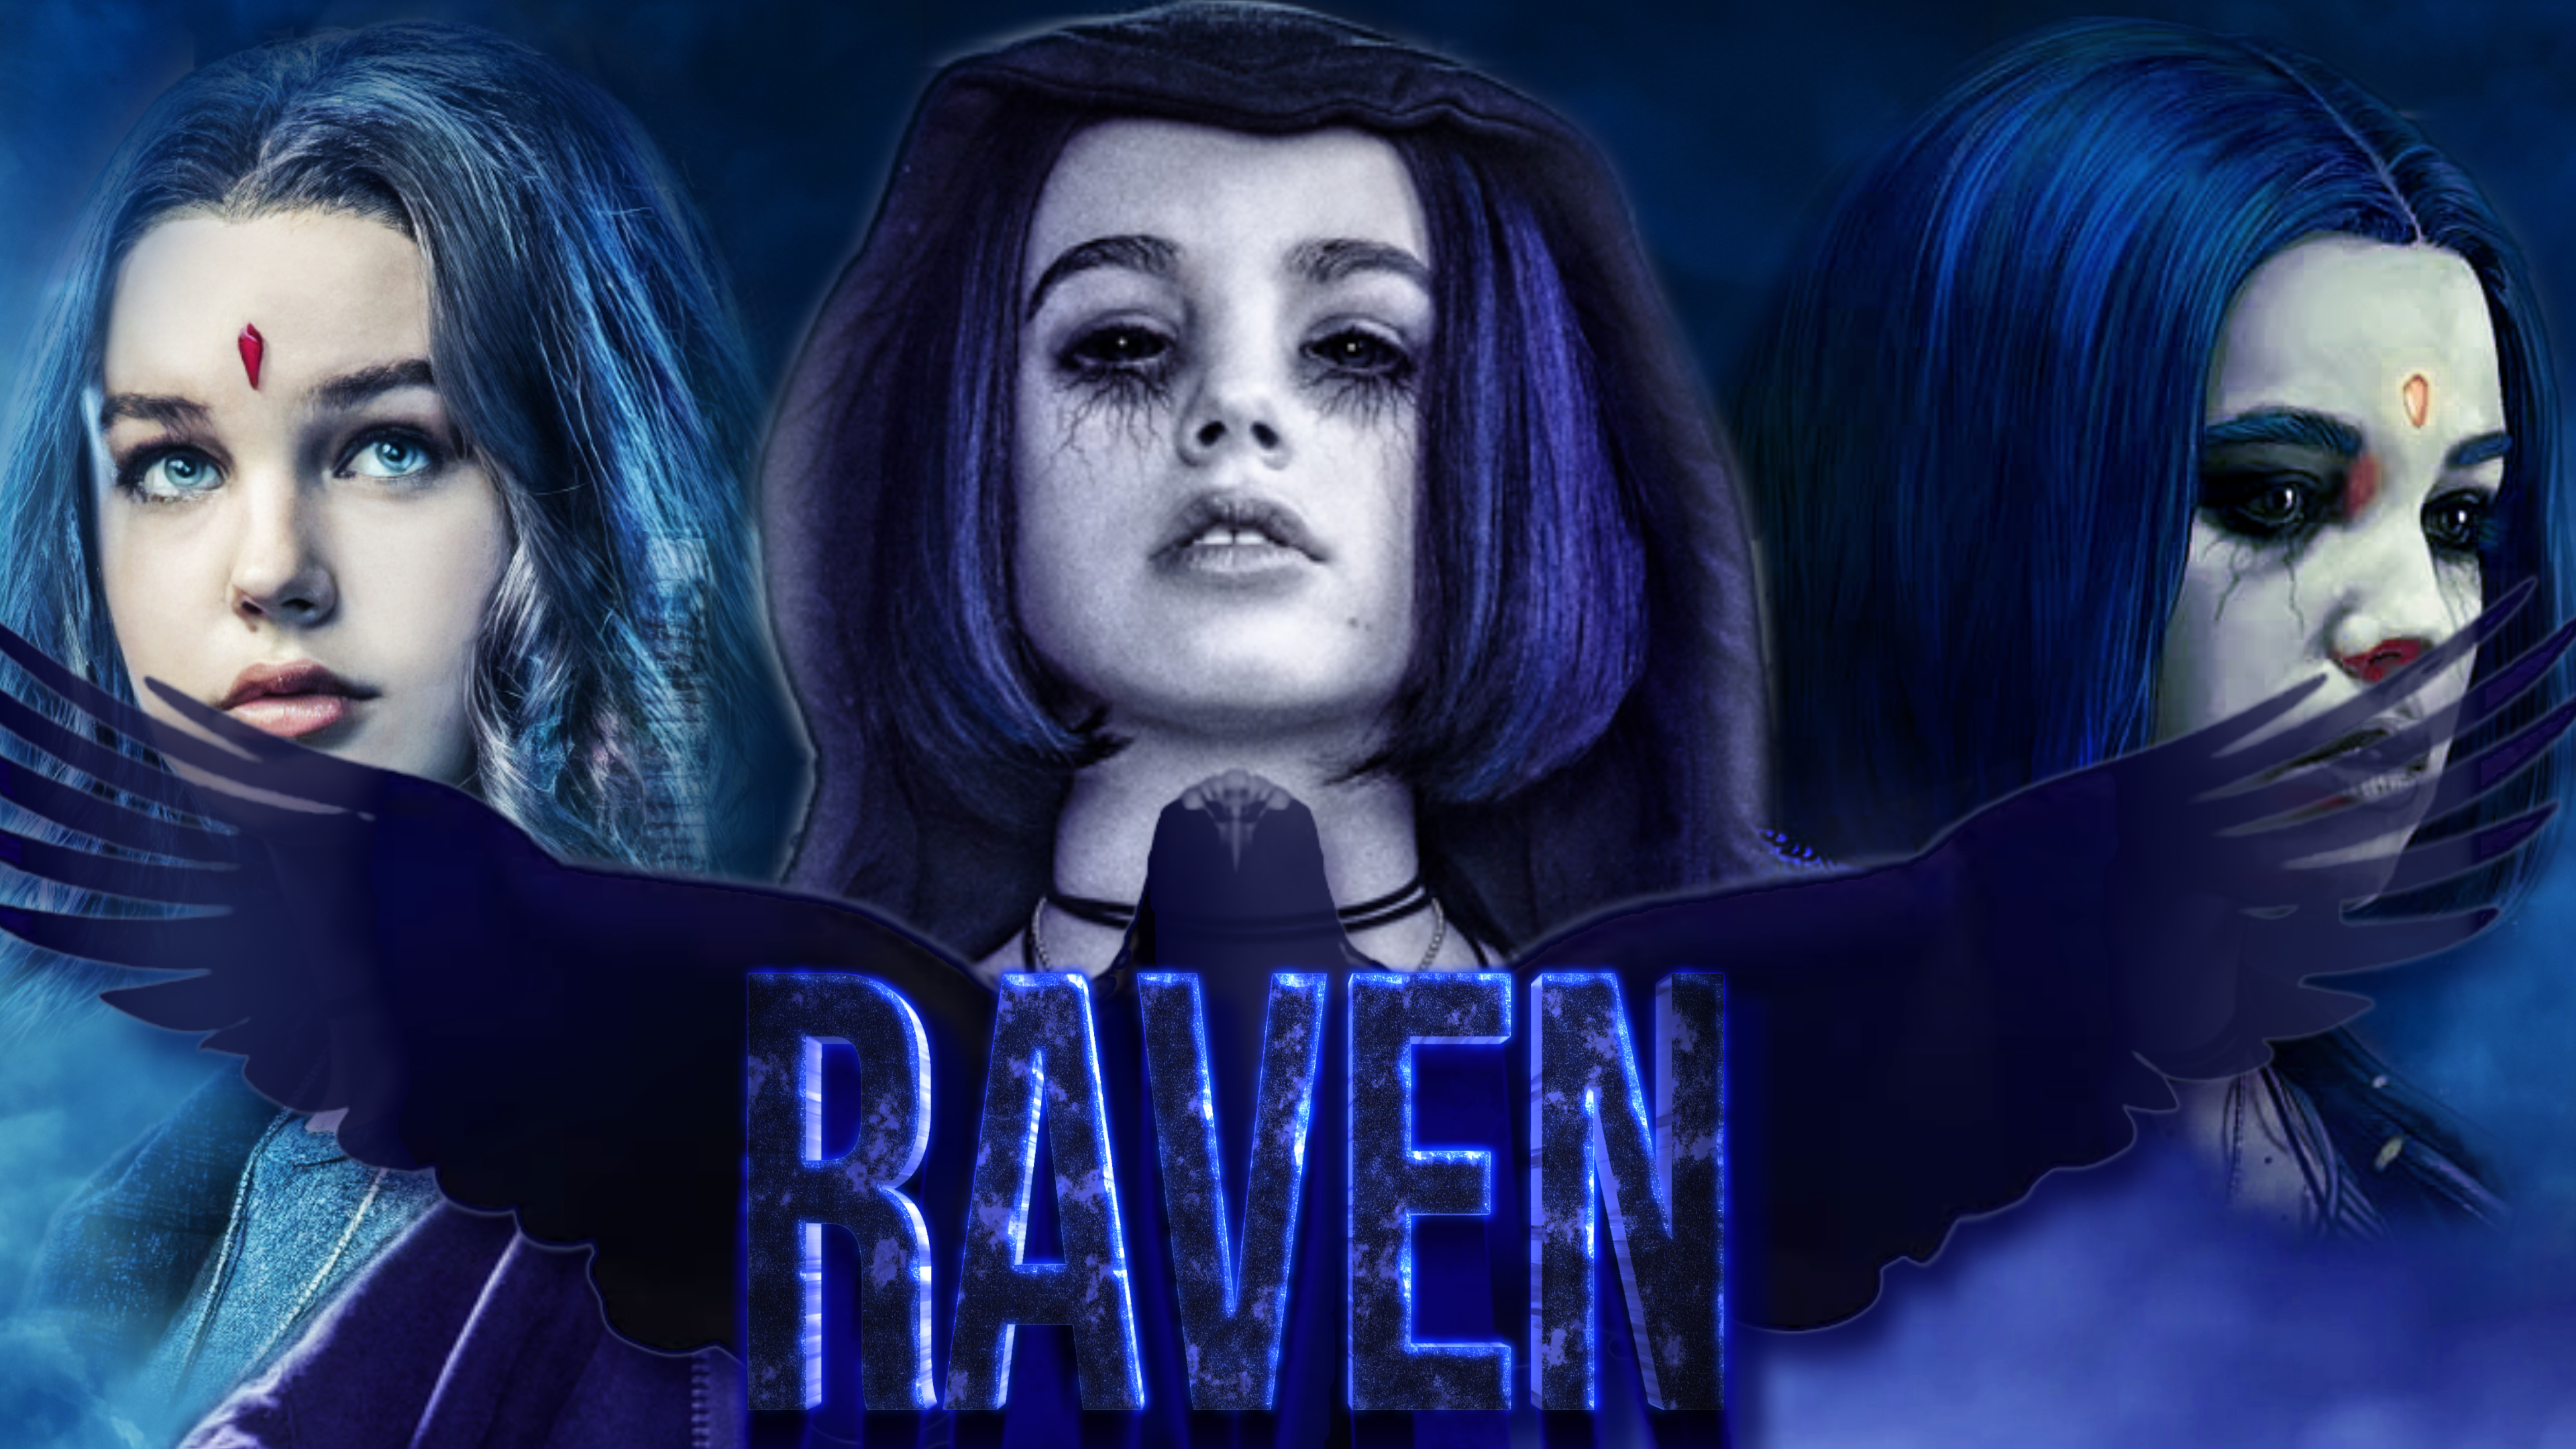 Raven 4k Wallpaper Wip Middle Pic Will Be Replaced Soon Titanstv